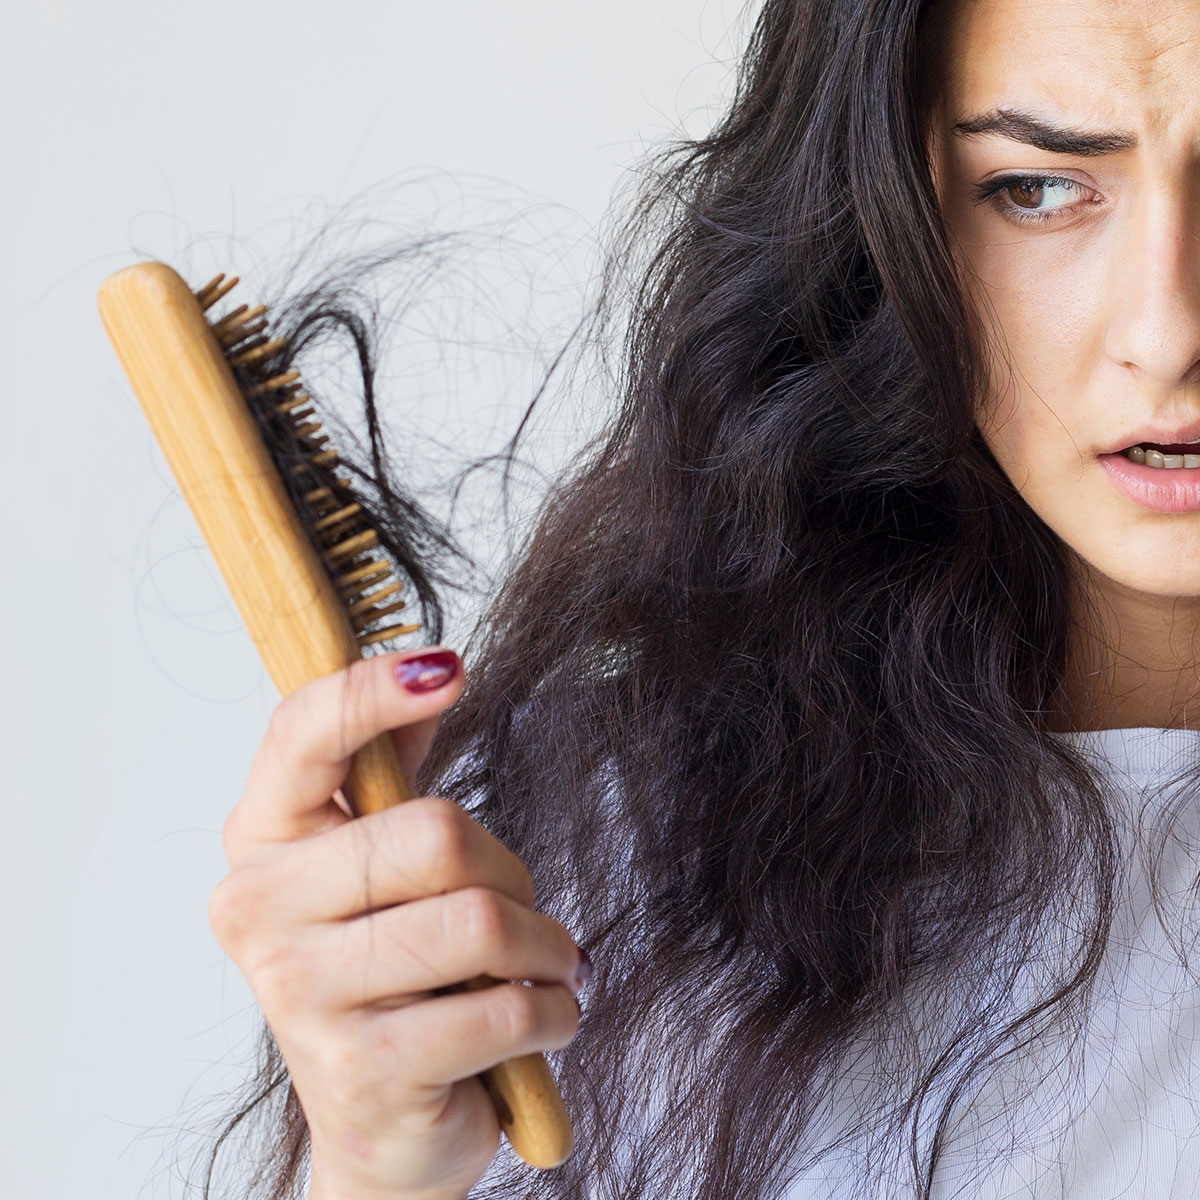 young woman experiencing hair loss in brush knotty hair